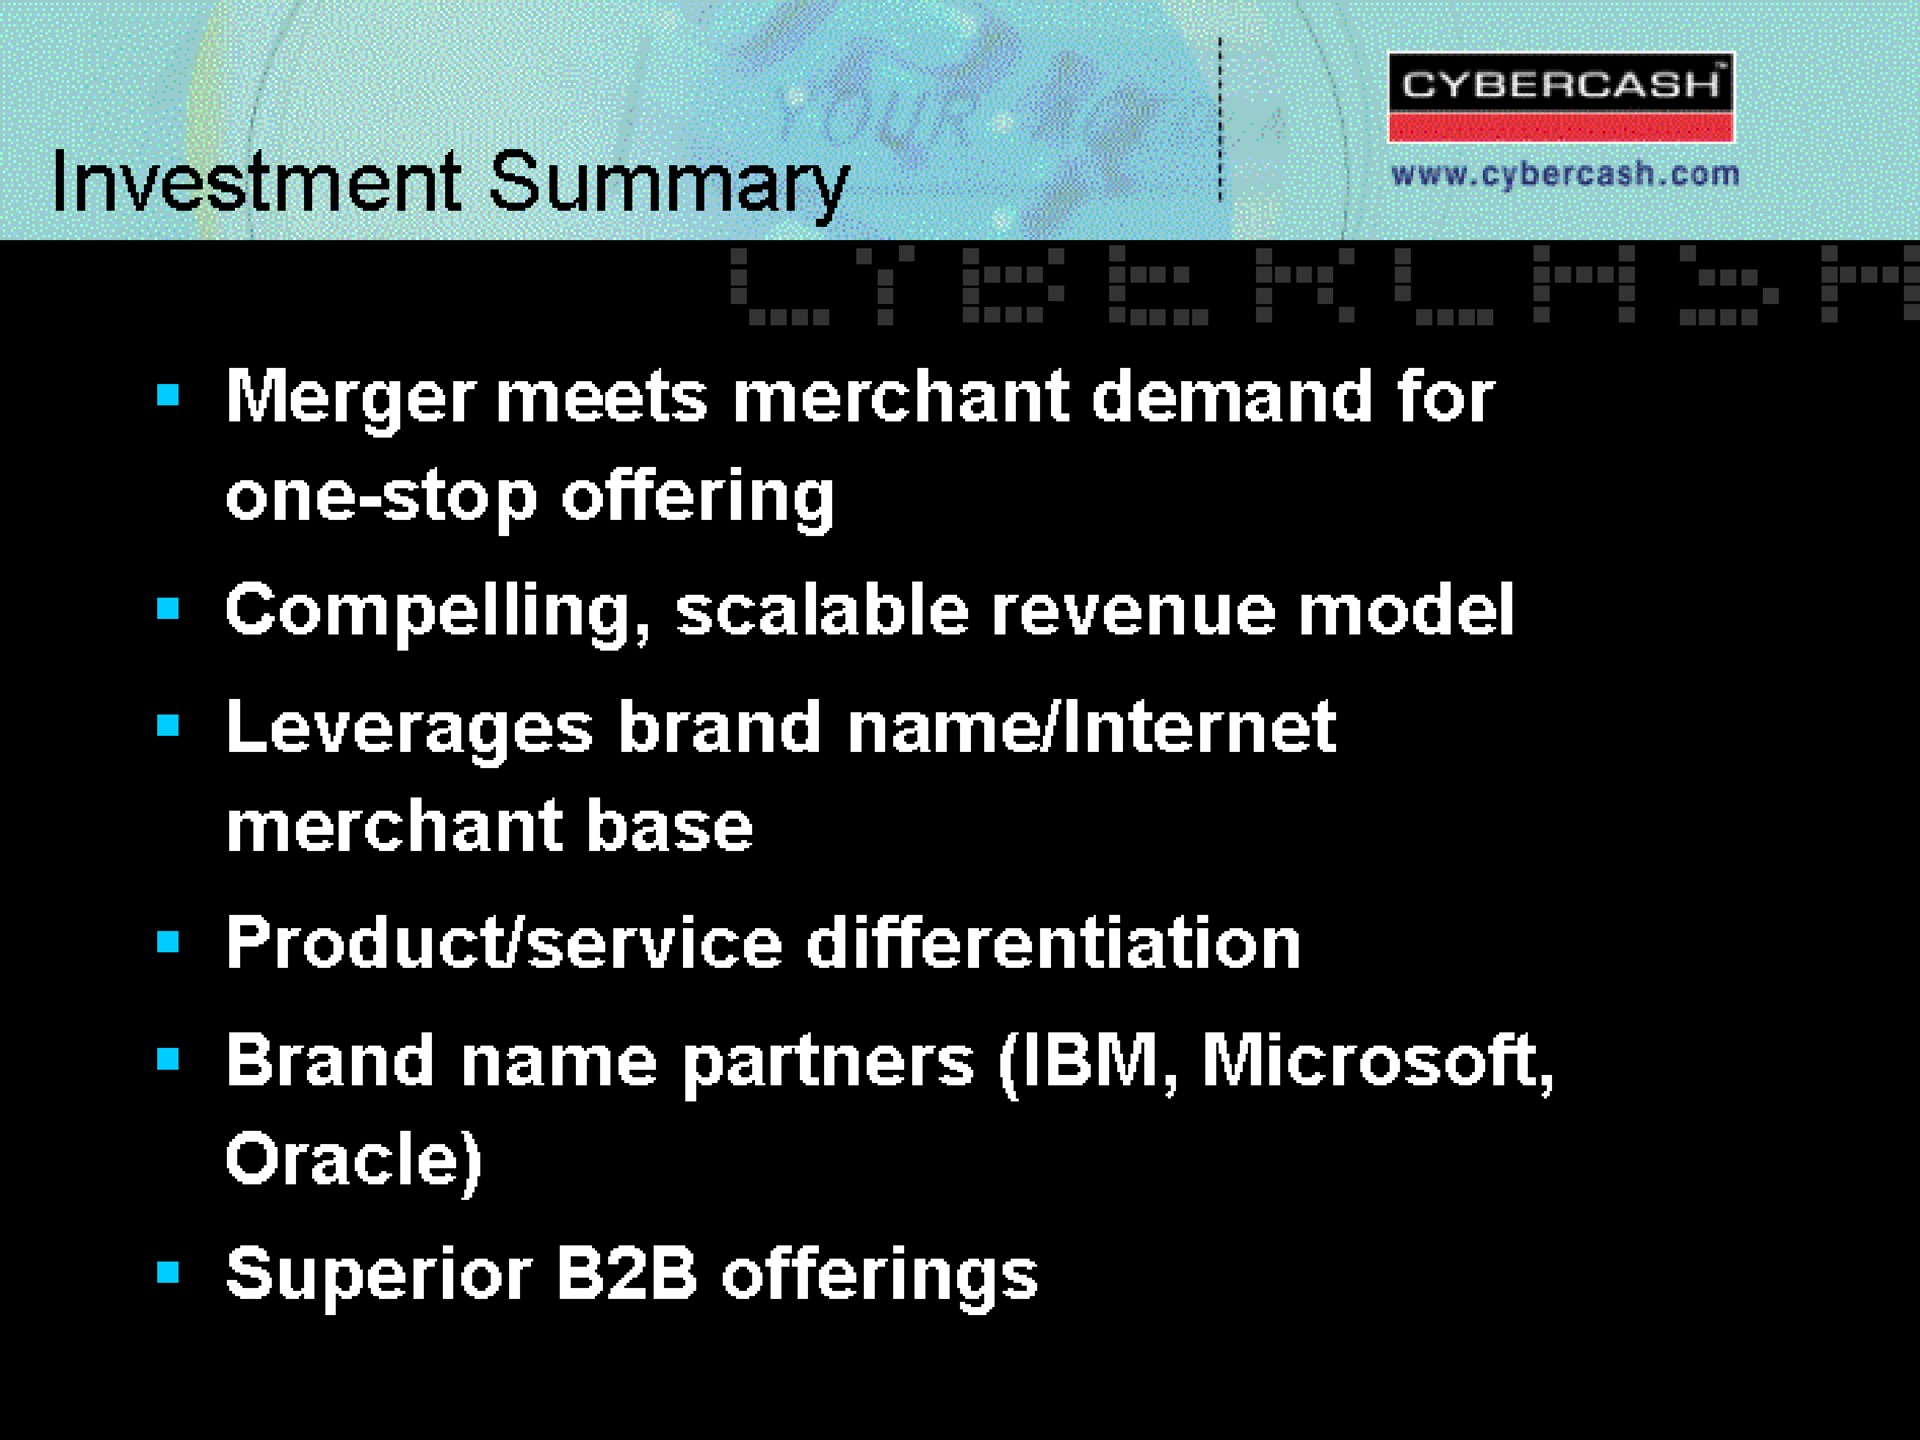 investment summary merger meets merchant demand for one stop offering compelling scalable revenue model leverages brand name merchant base brand name partners oracle superior offerings | CyberCash